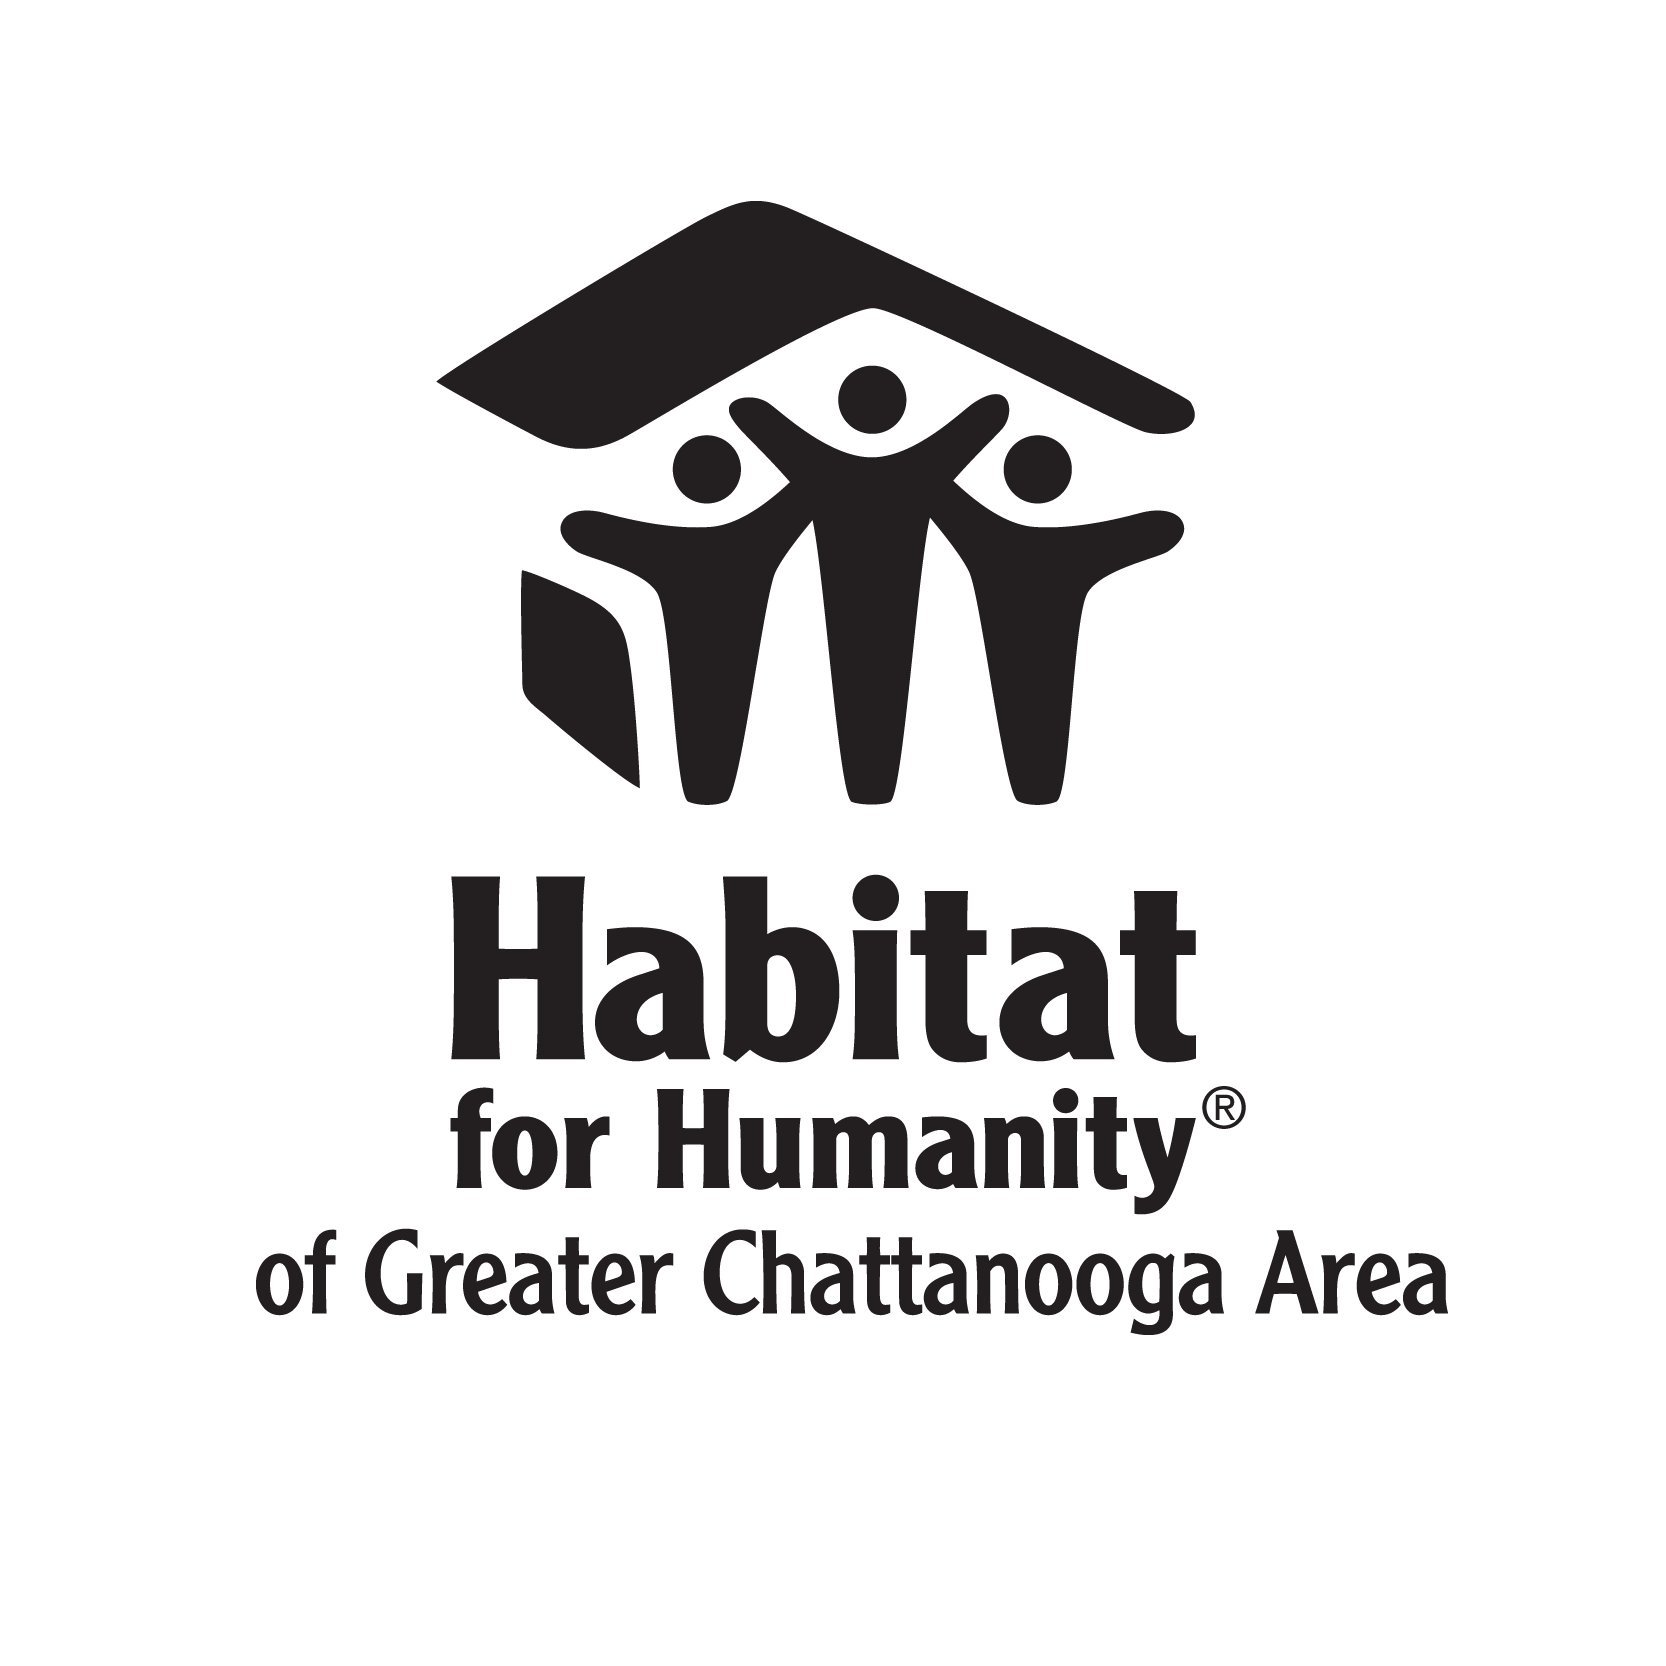 HFHGCA is an ecumenical Christian non-profit housing organization working in partnership with God’s people to build simple, decent, and affordable homes.